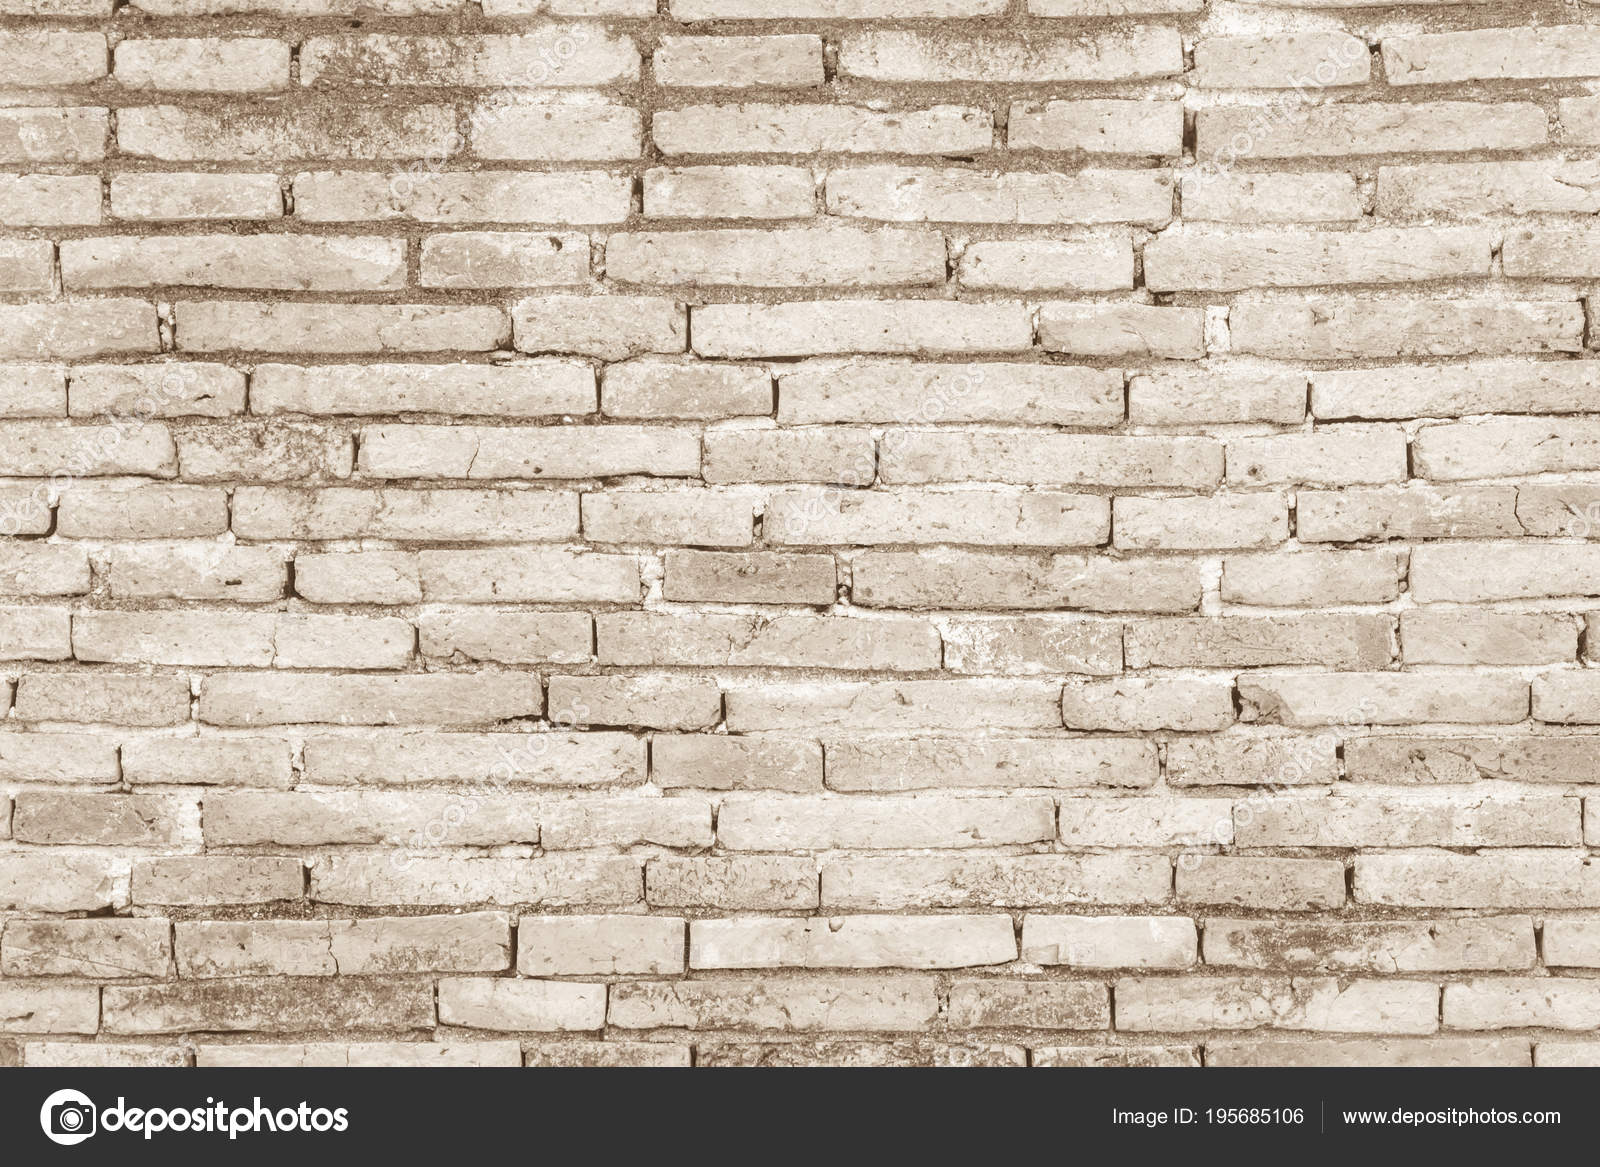 Cream colors and white brick wall art concrete or stone texture Stock Photo  by ©P88888888k 195685106